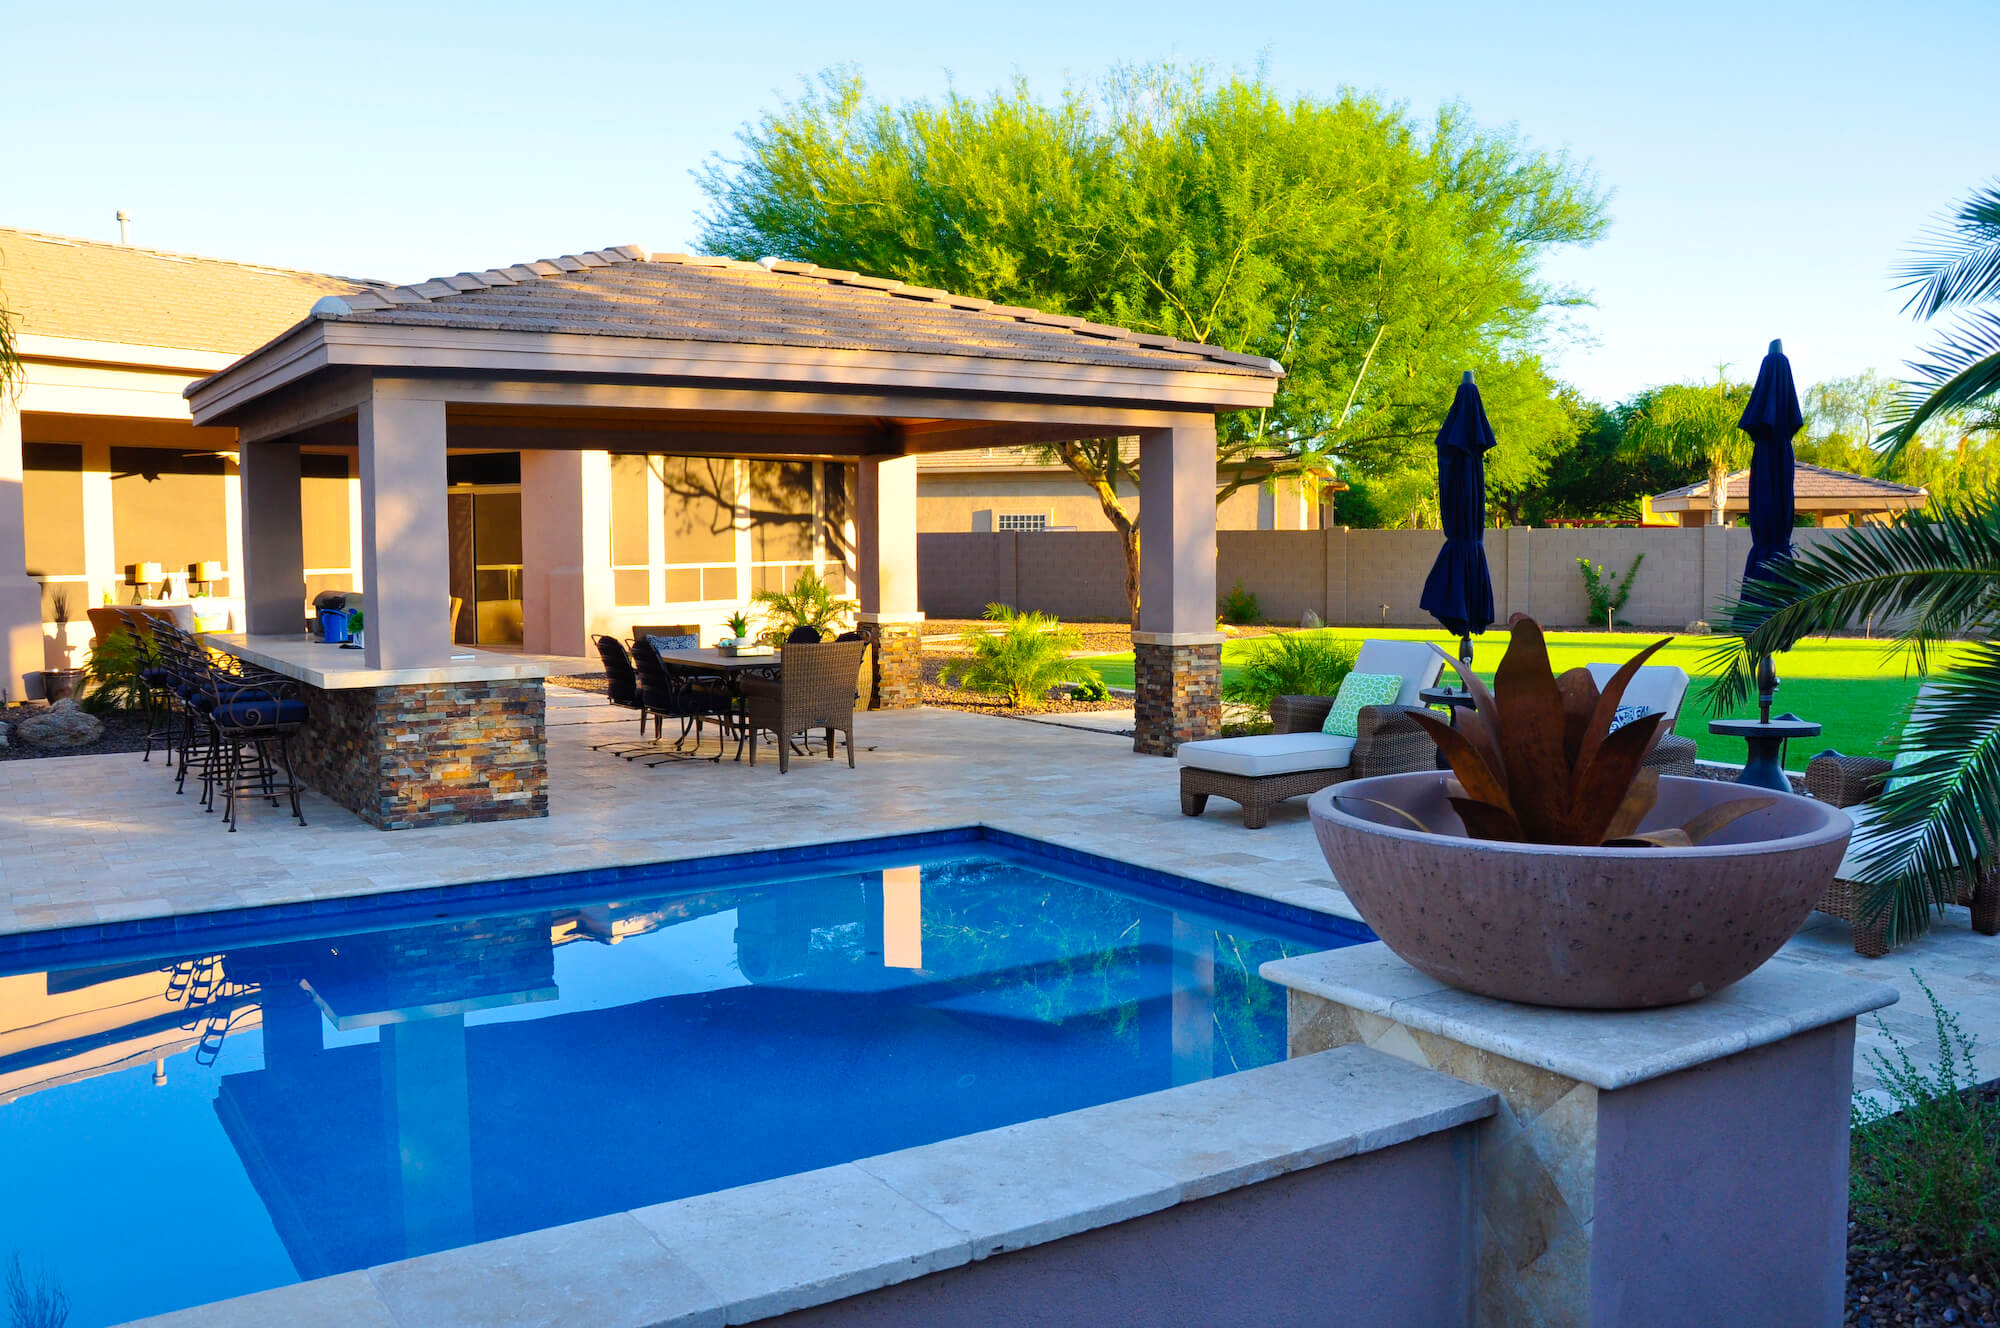 5 tips to revitalize your pool area